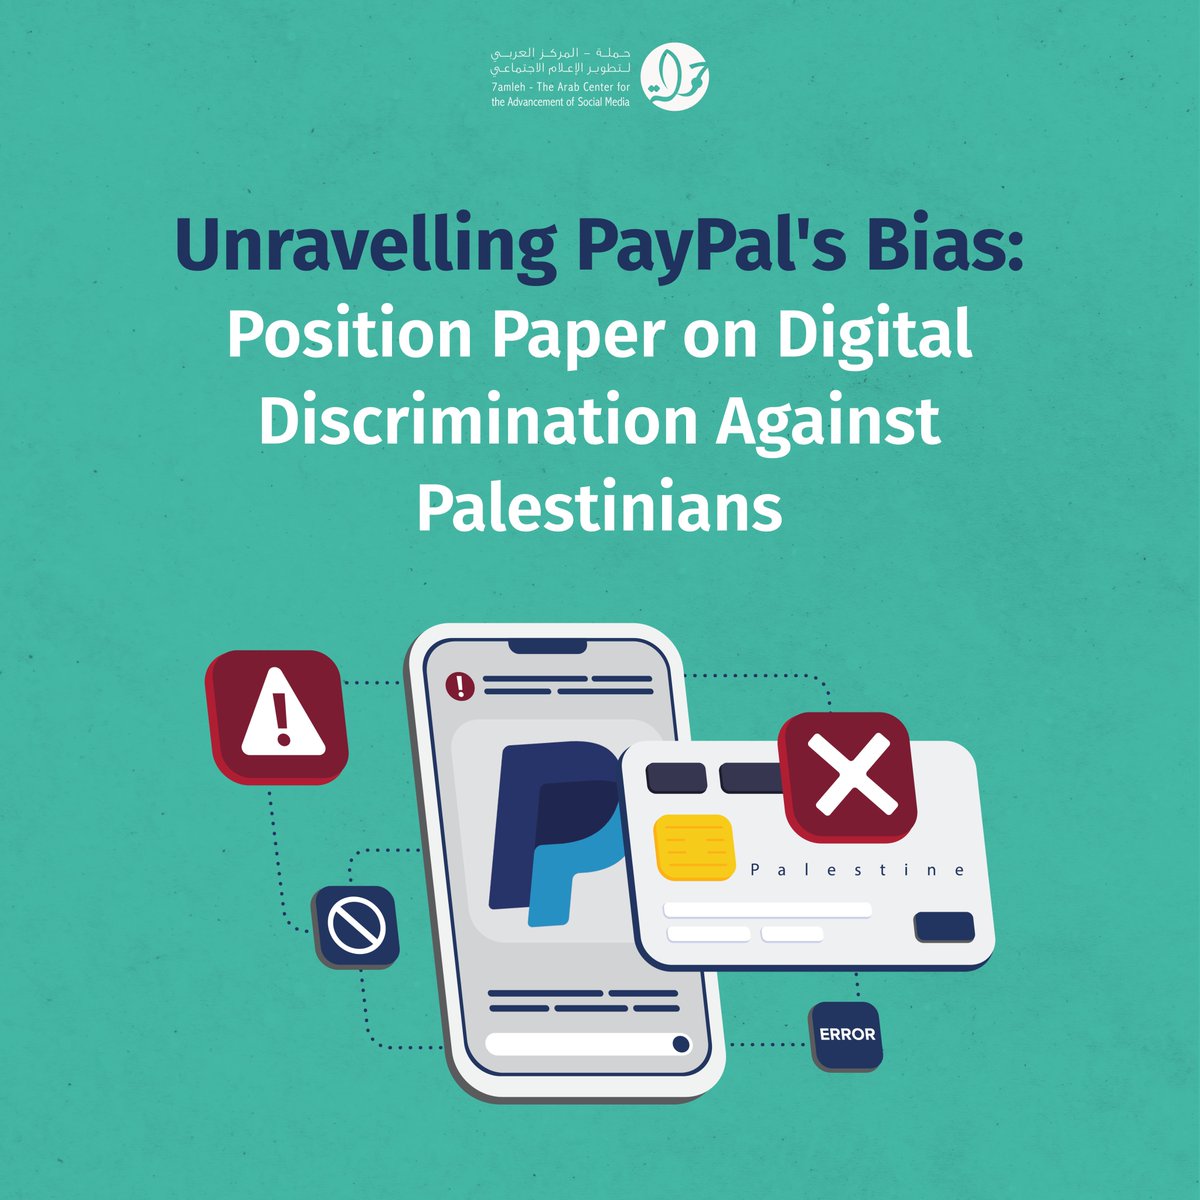 7amleh issued a position paper regarding the digital discrimination practiced by PayPal, The paper criticizes PayPal's discriminatory policies against Palestinians & preventing them from using its services. 🔗Read paper: 7amleh.org/2024/05/08/pos…